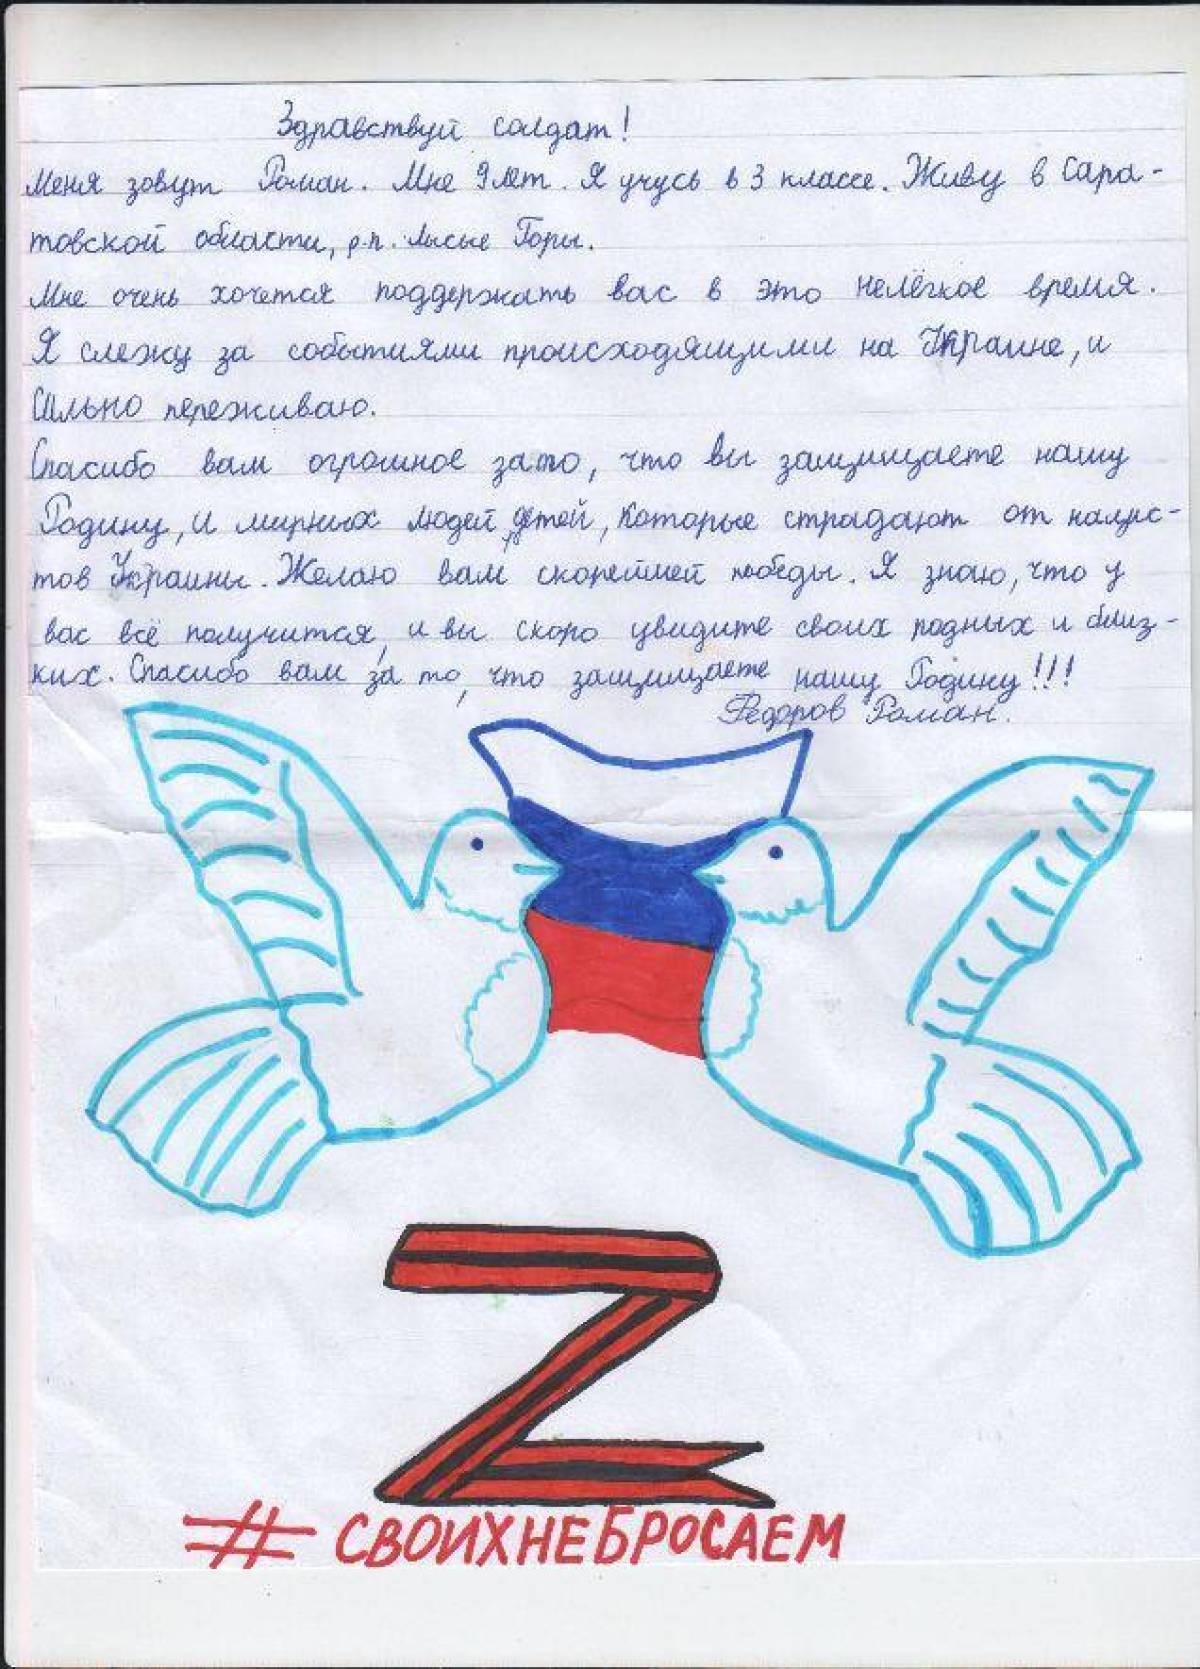 Devoted coloring page a letter to a soldier from a student